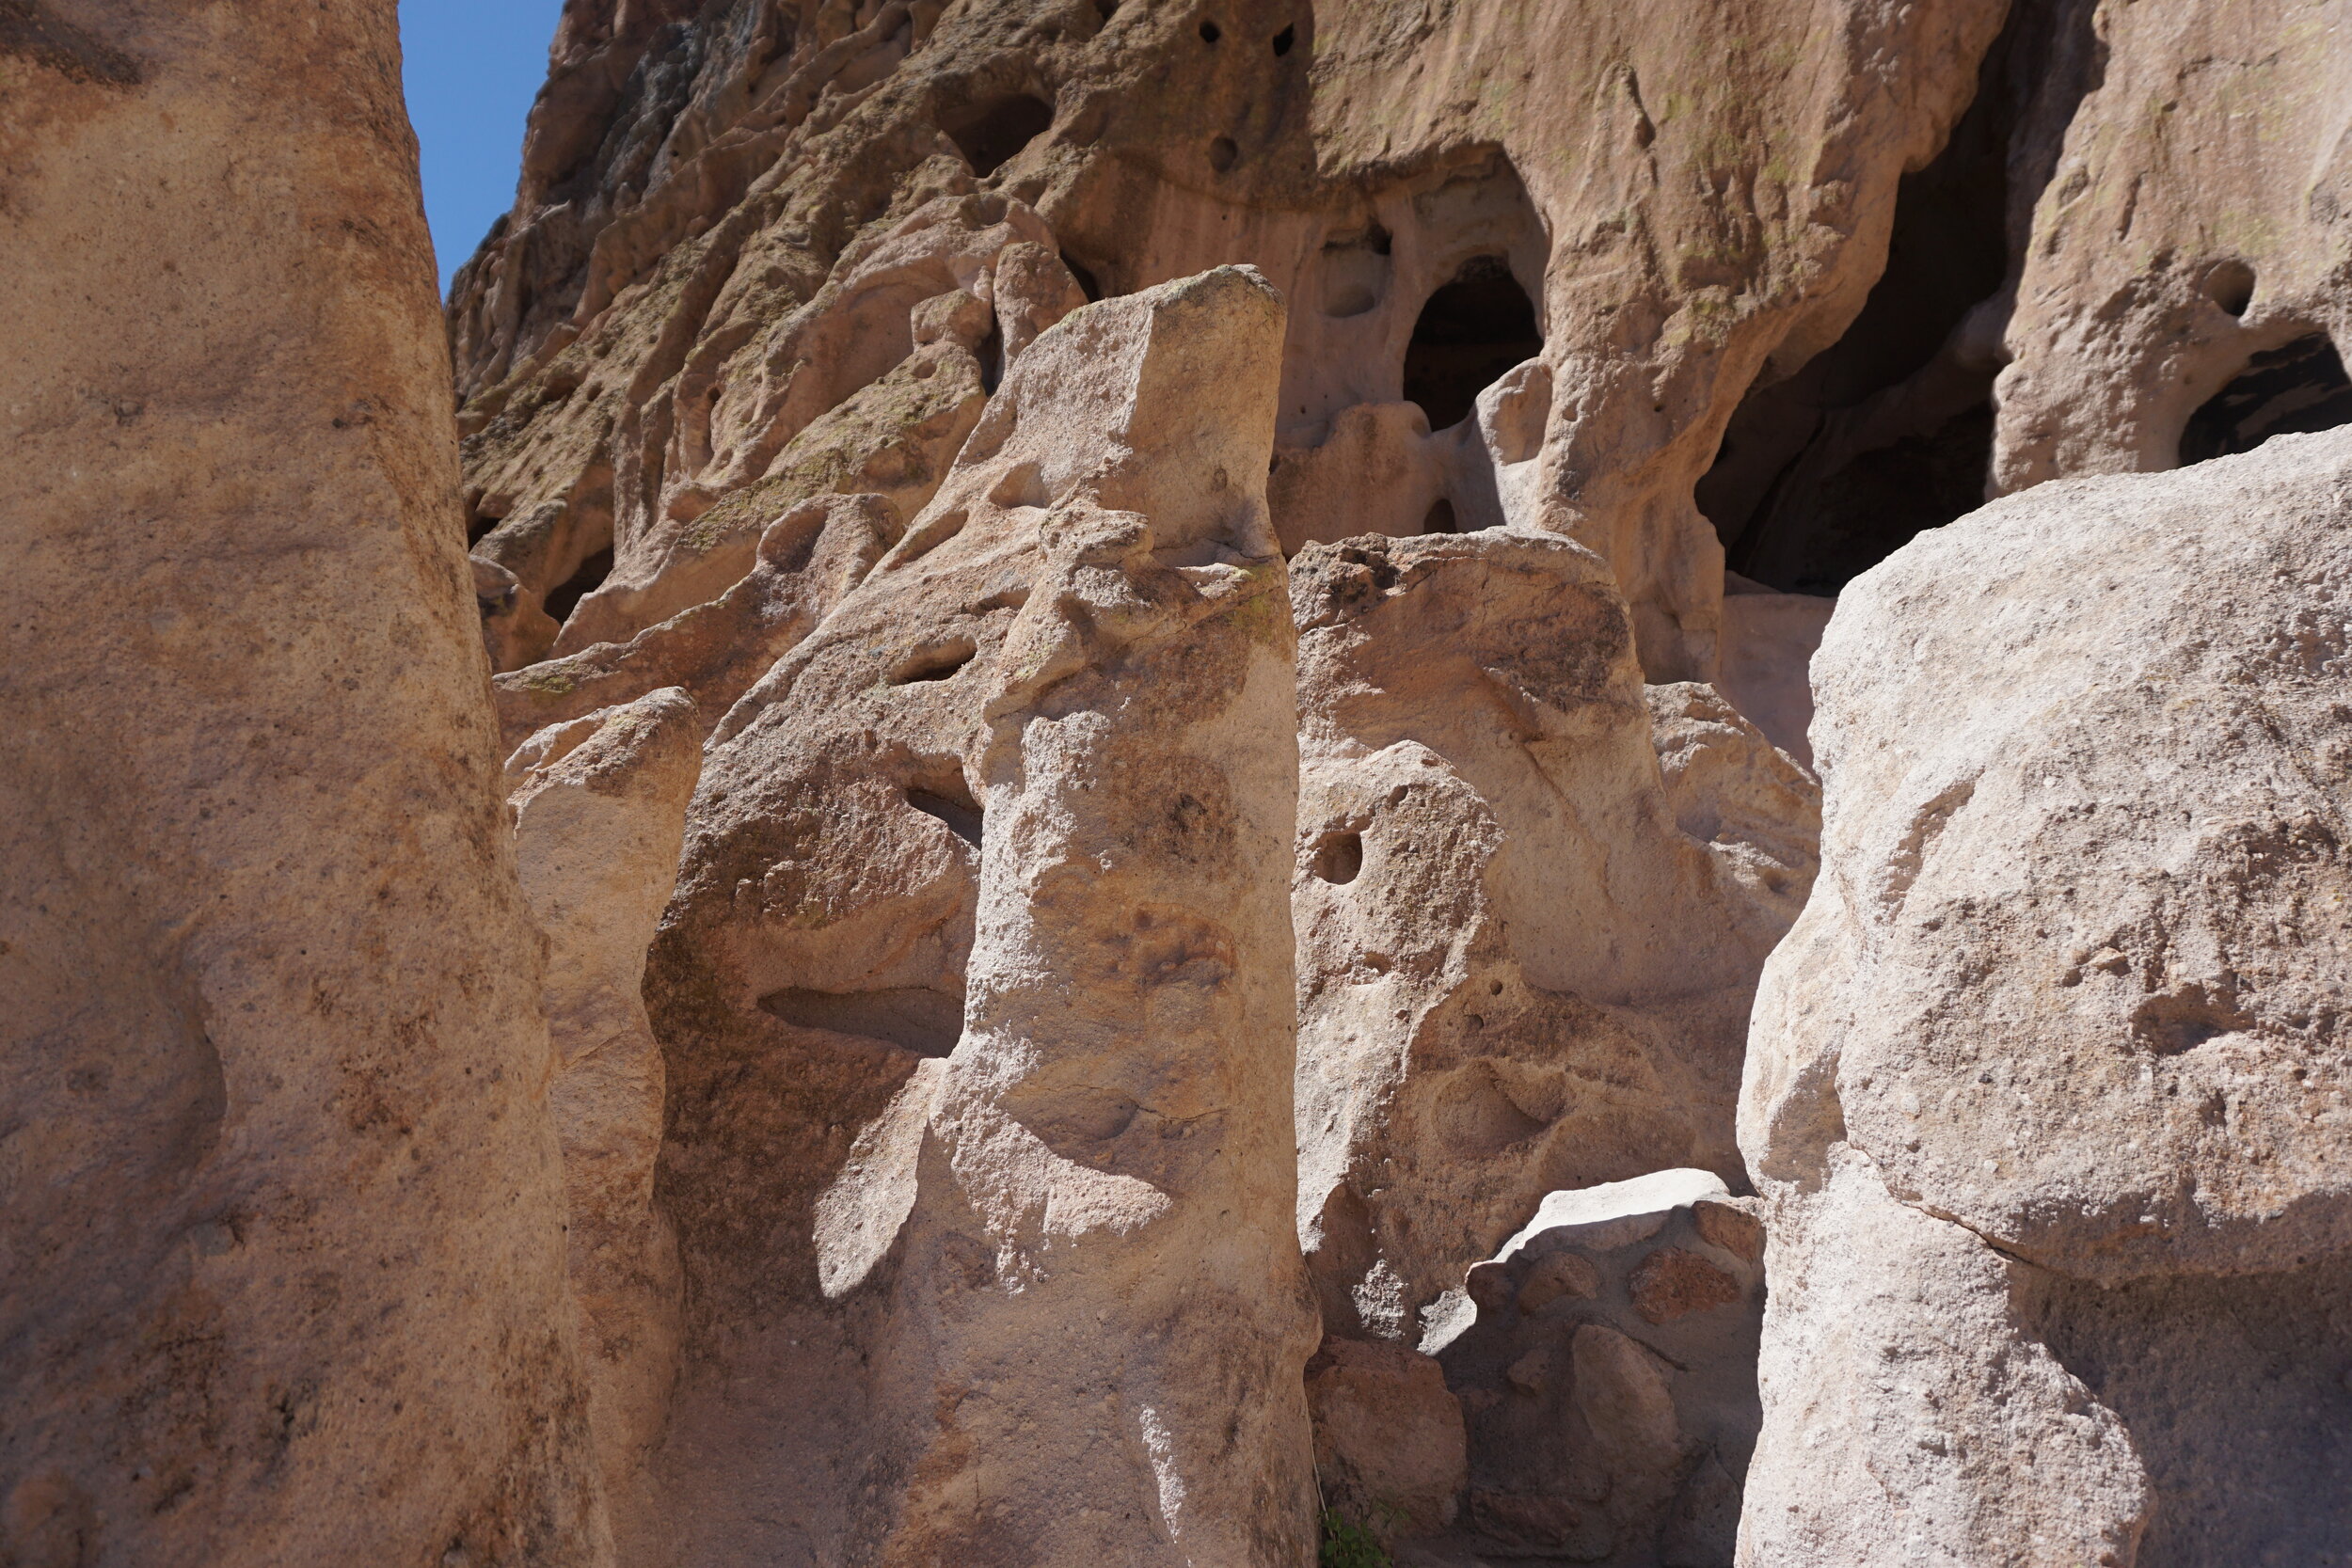 Rock formations at Bandelier National Monument